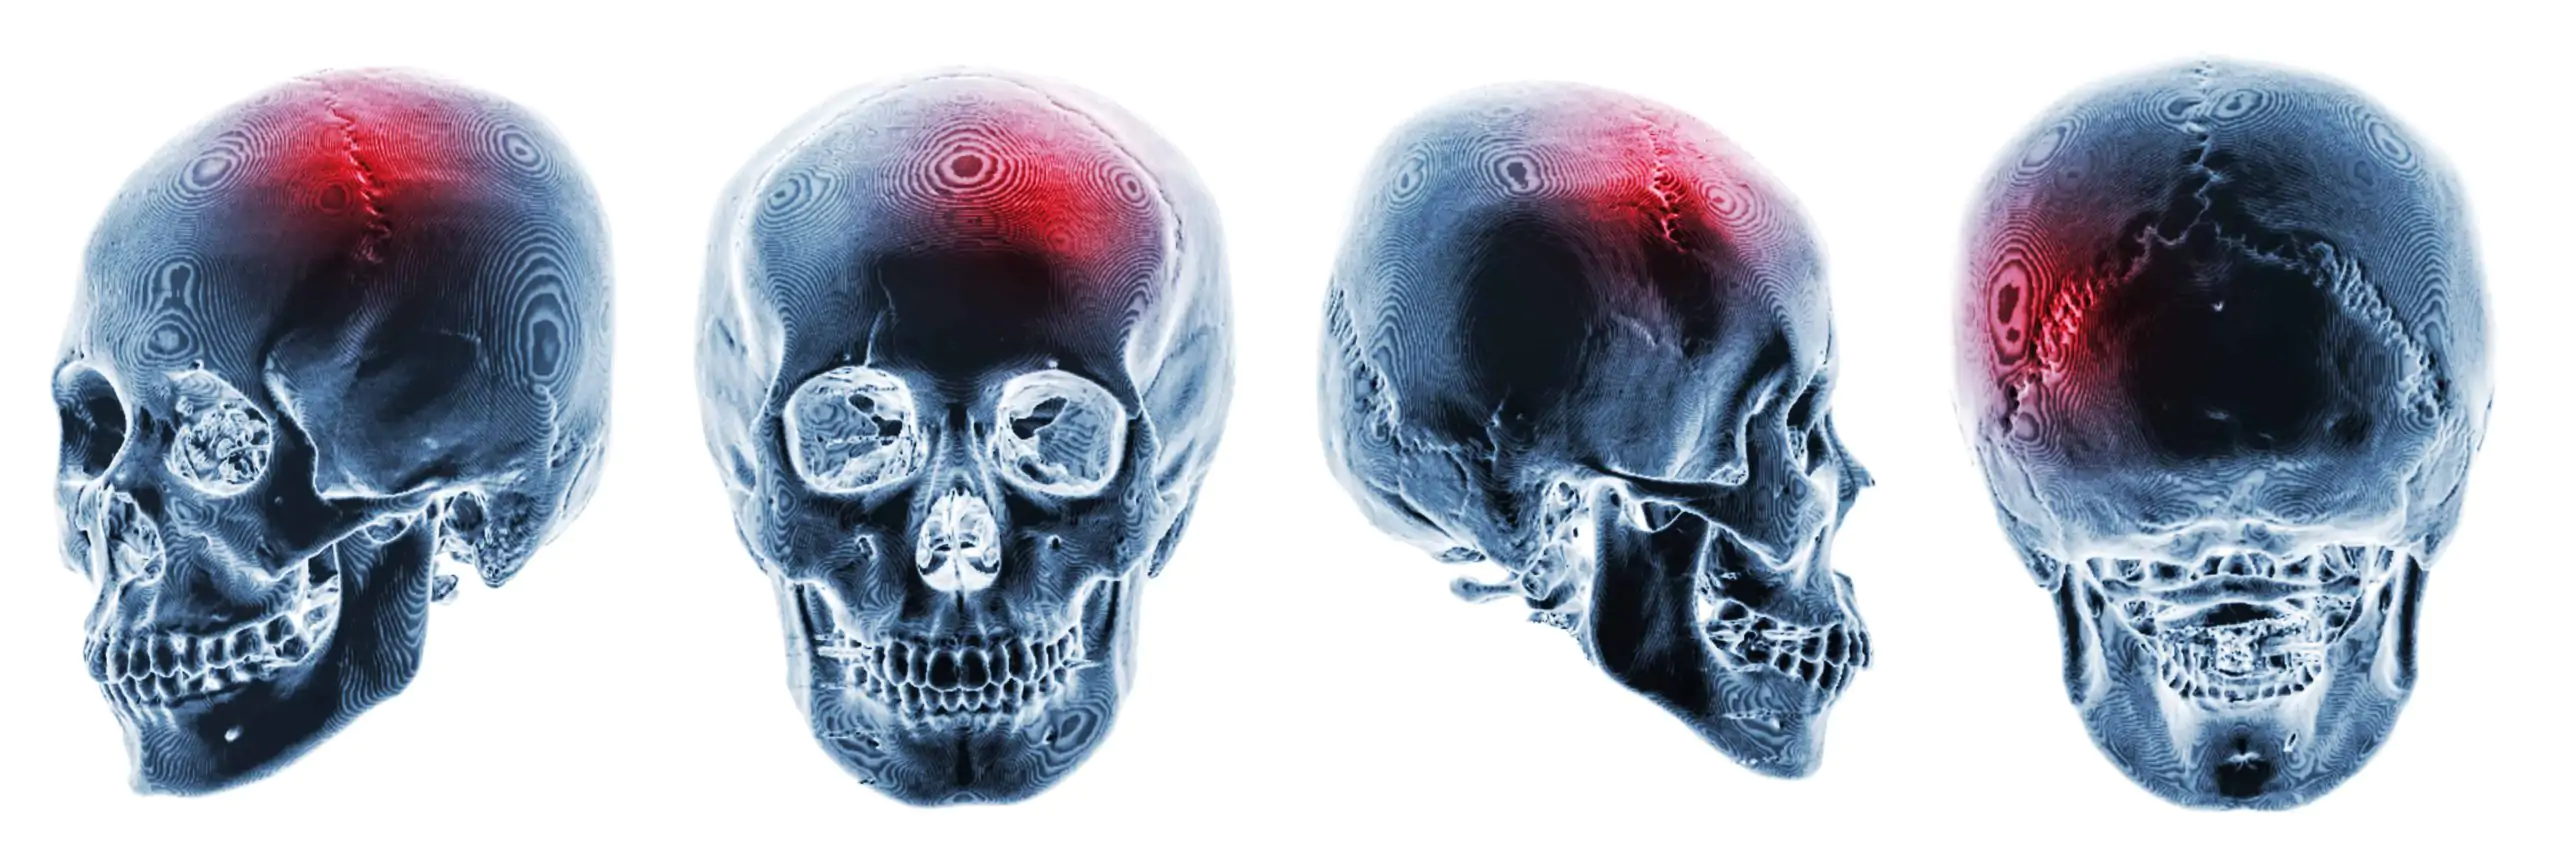 Skull Fracture Injuries: Treatment, Lawsuits & Settlements